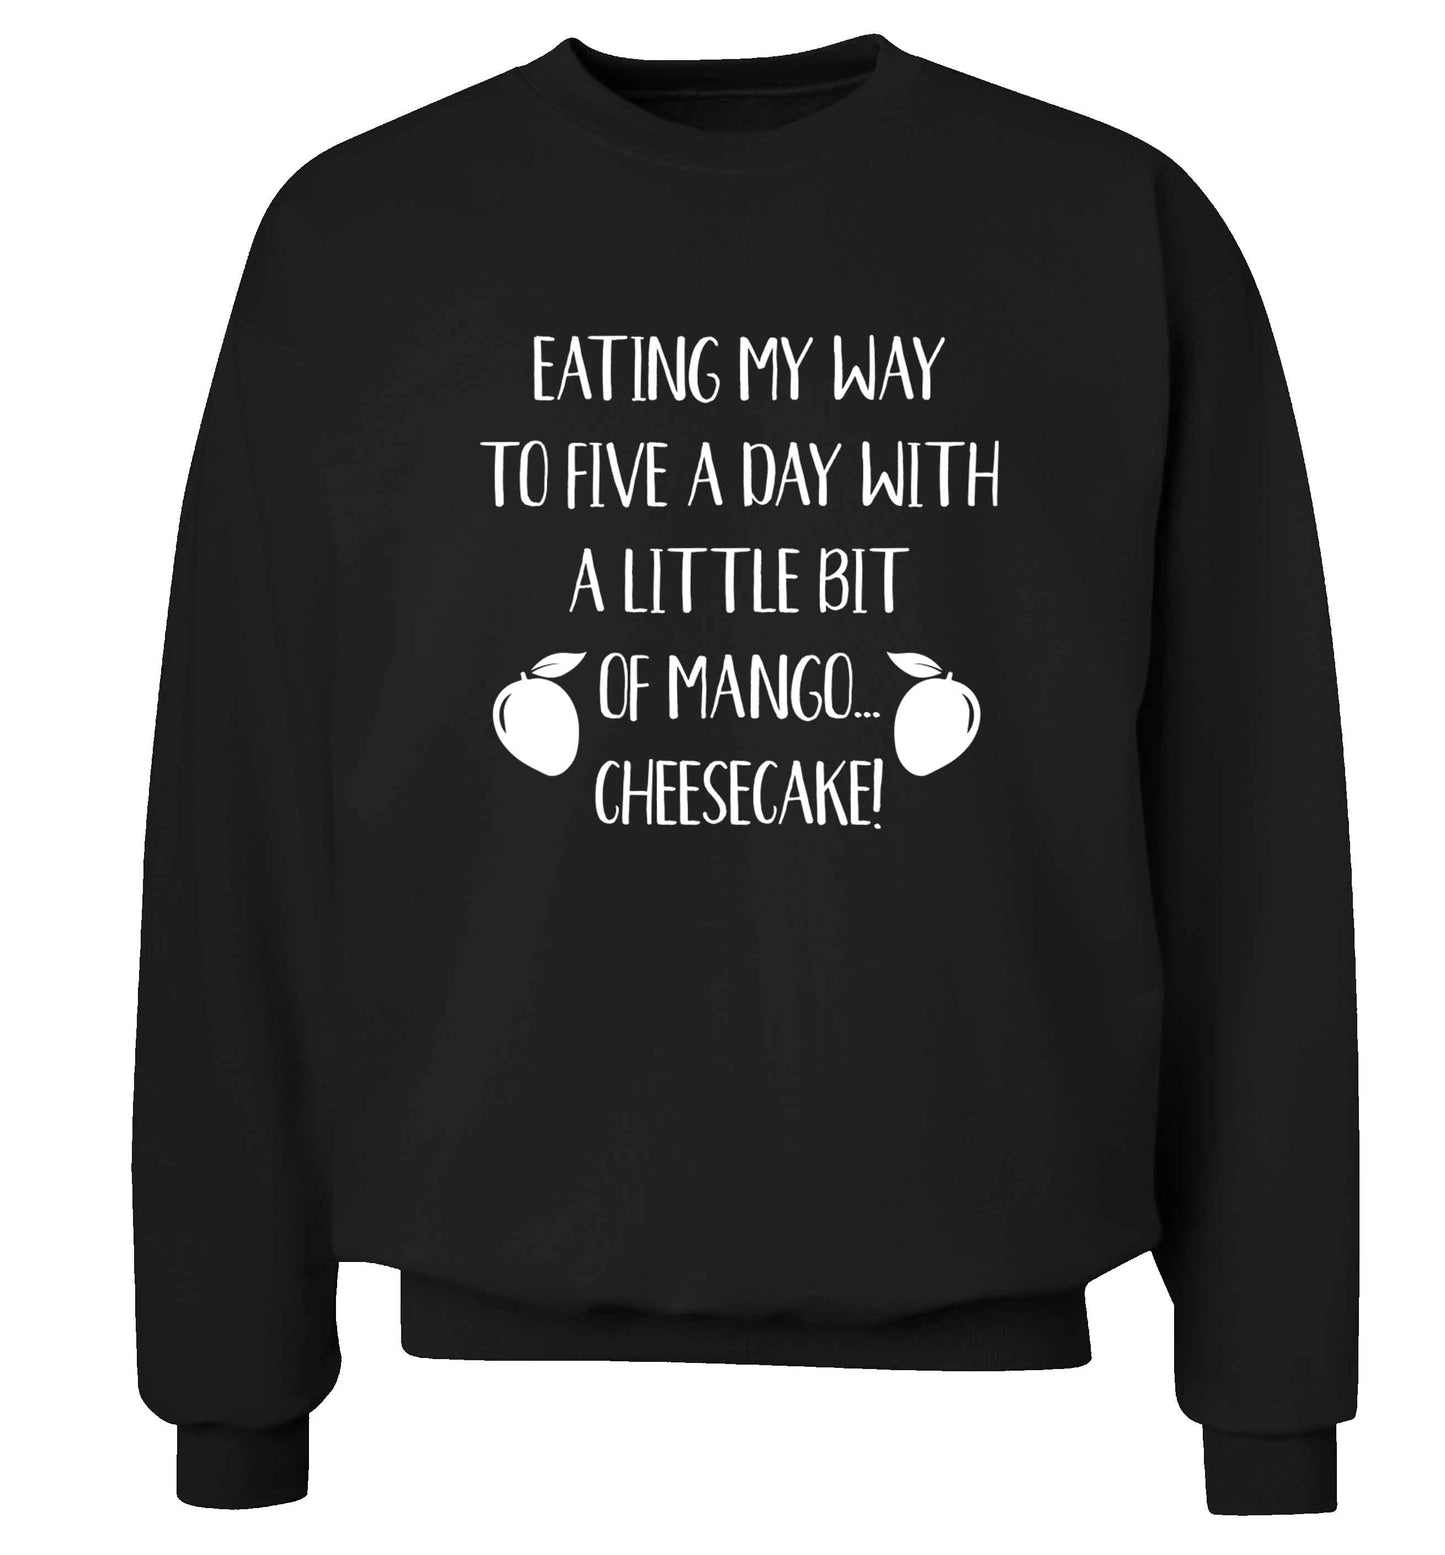 Eating my way to five a day with a little bit of mango cheesecake Adult's unisex black Sweater 2XL